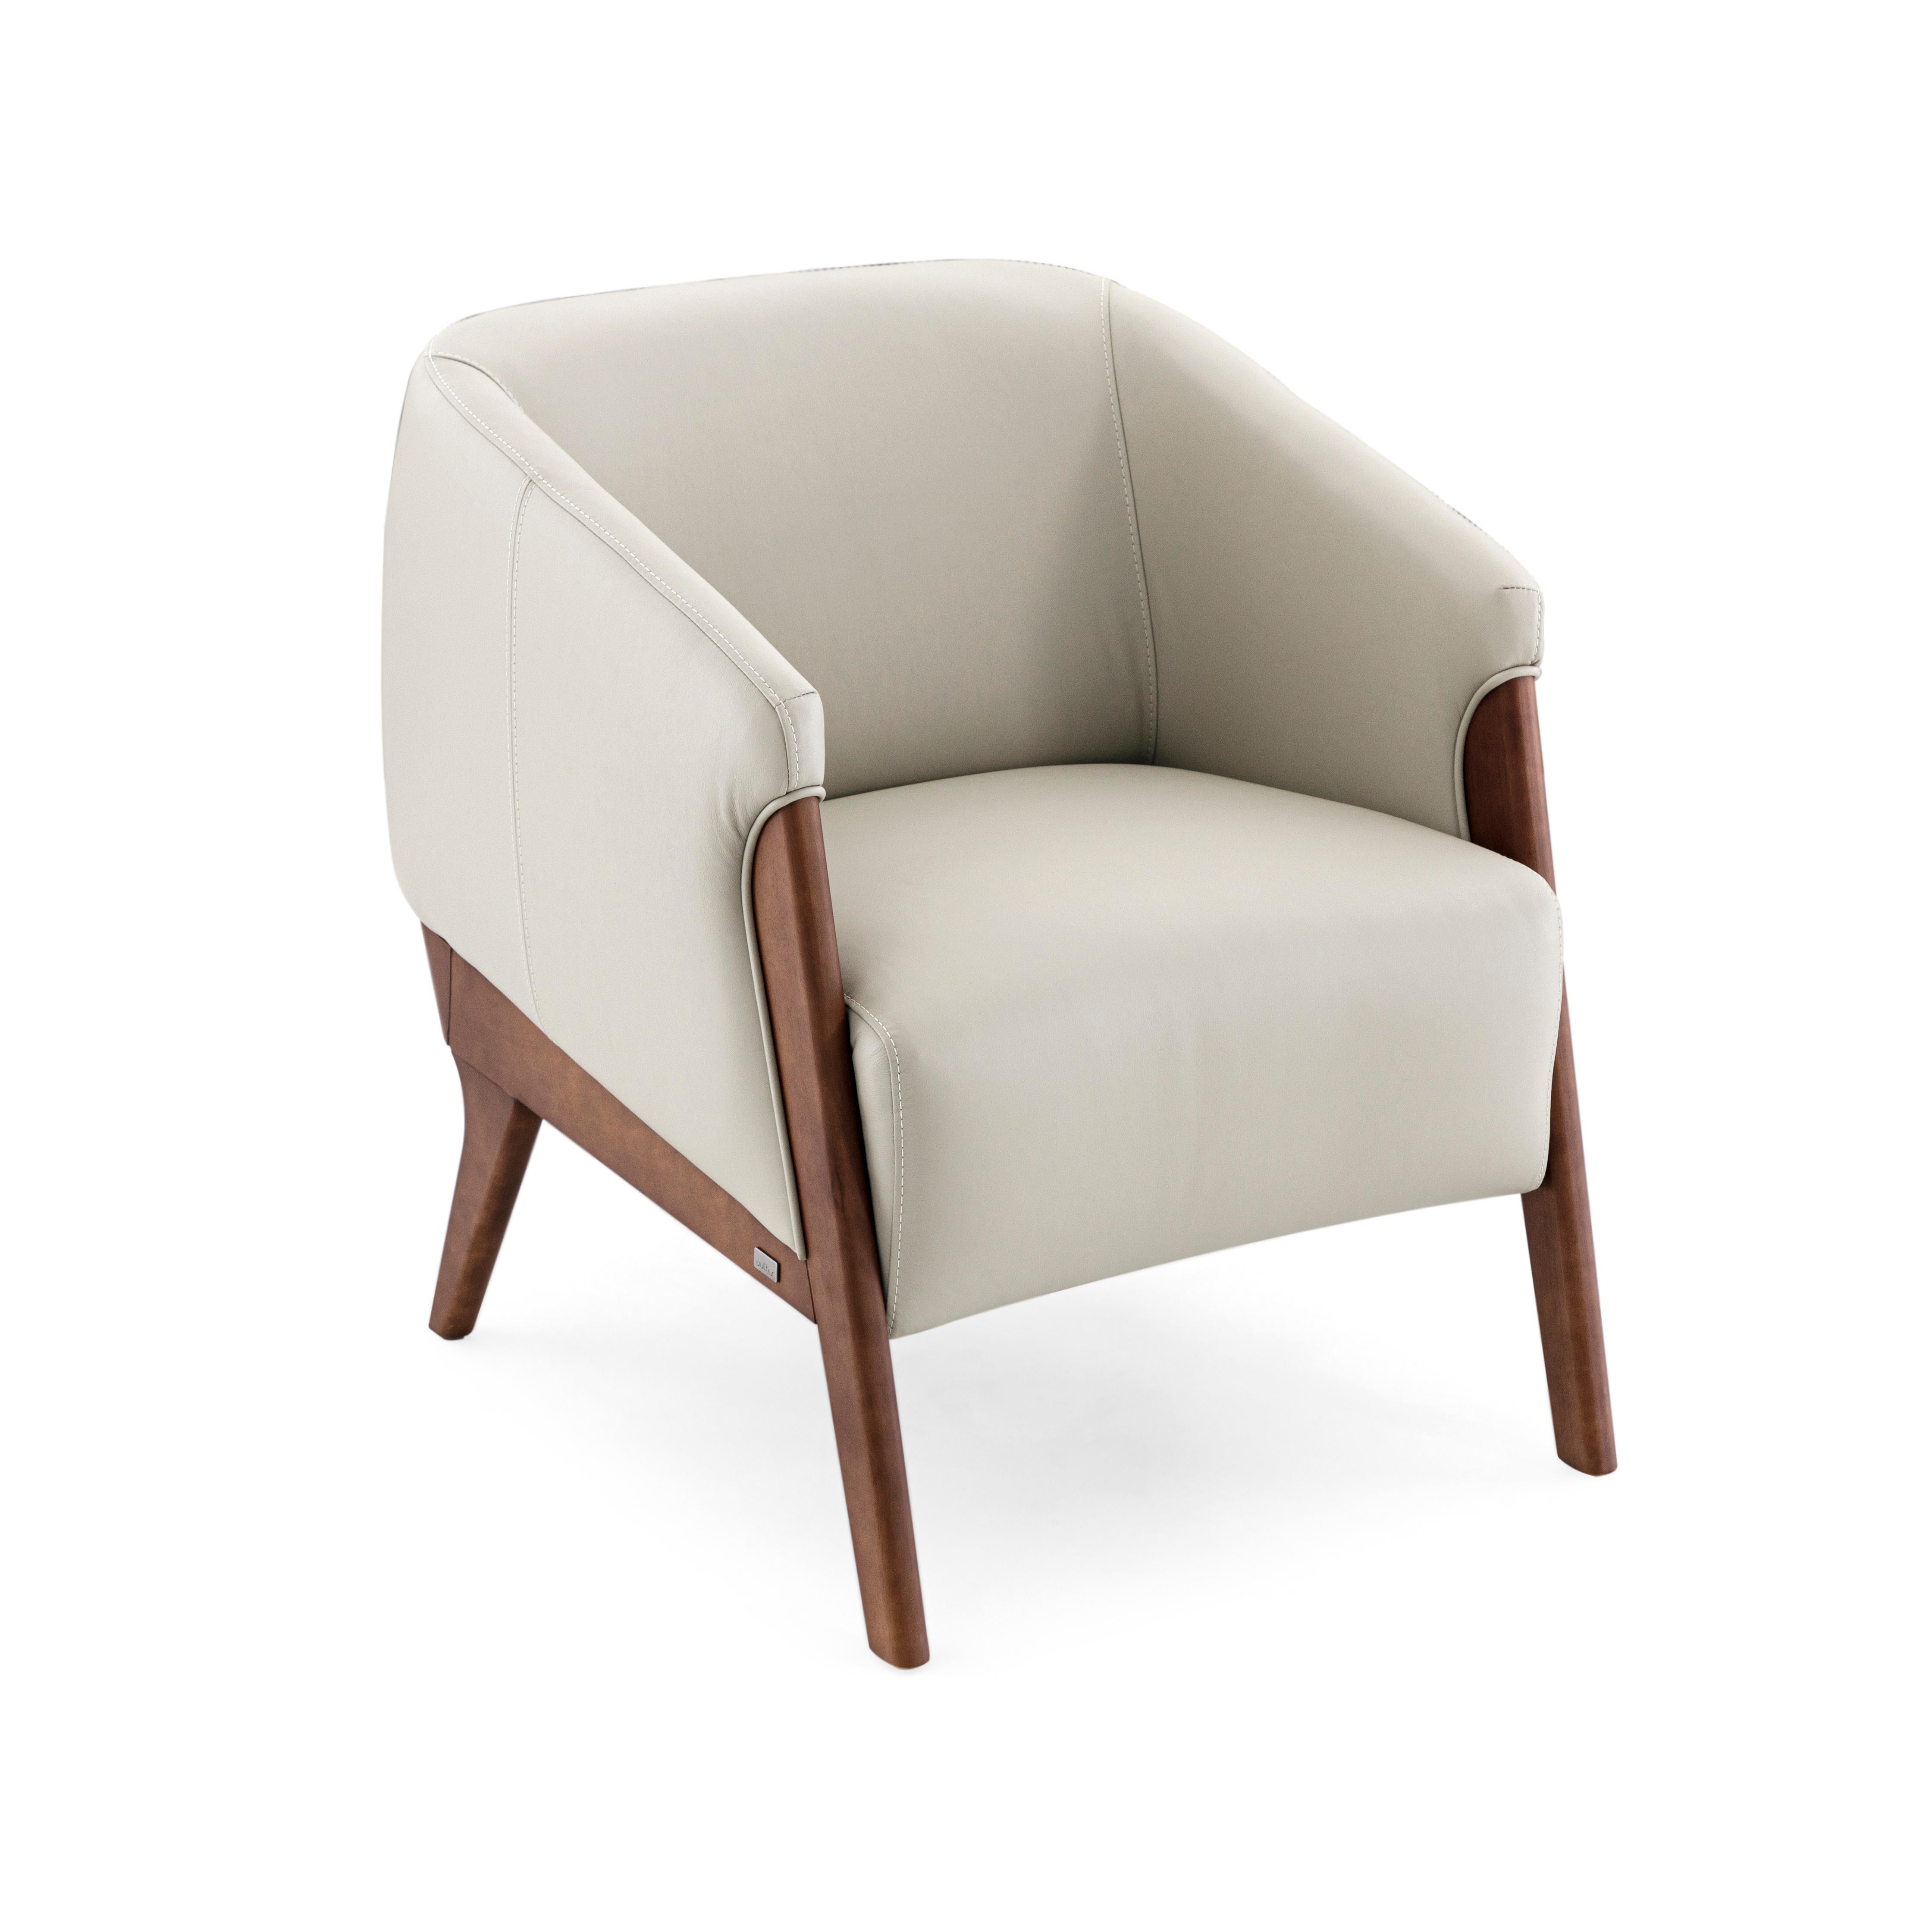 Abra Armchair in White Leather and Walnut Wood Finish For Sale 1